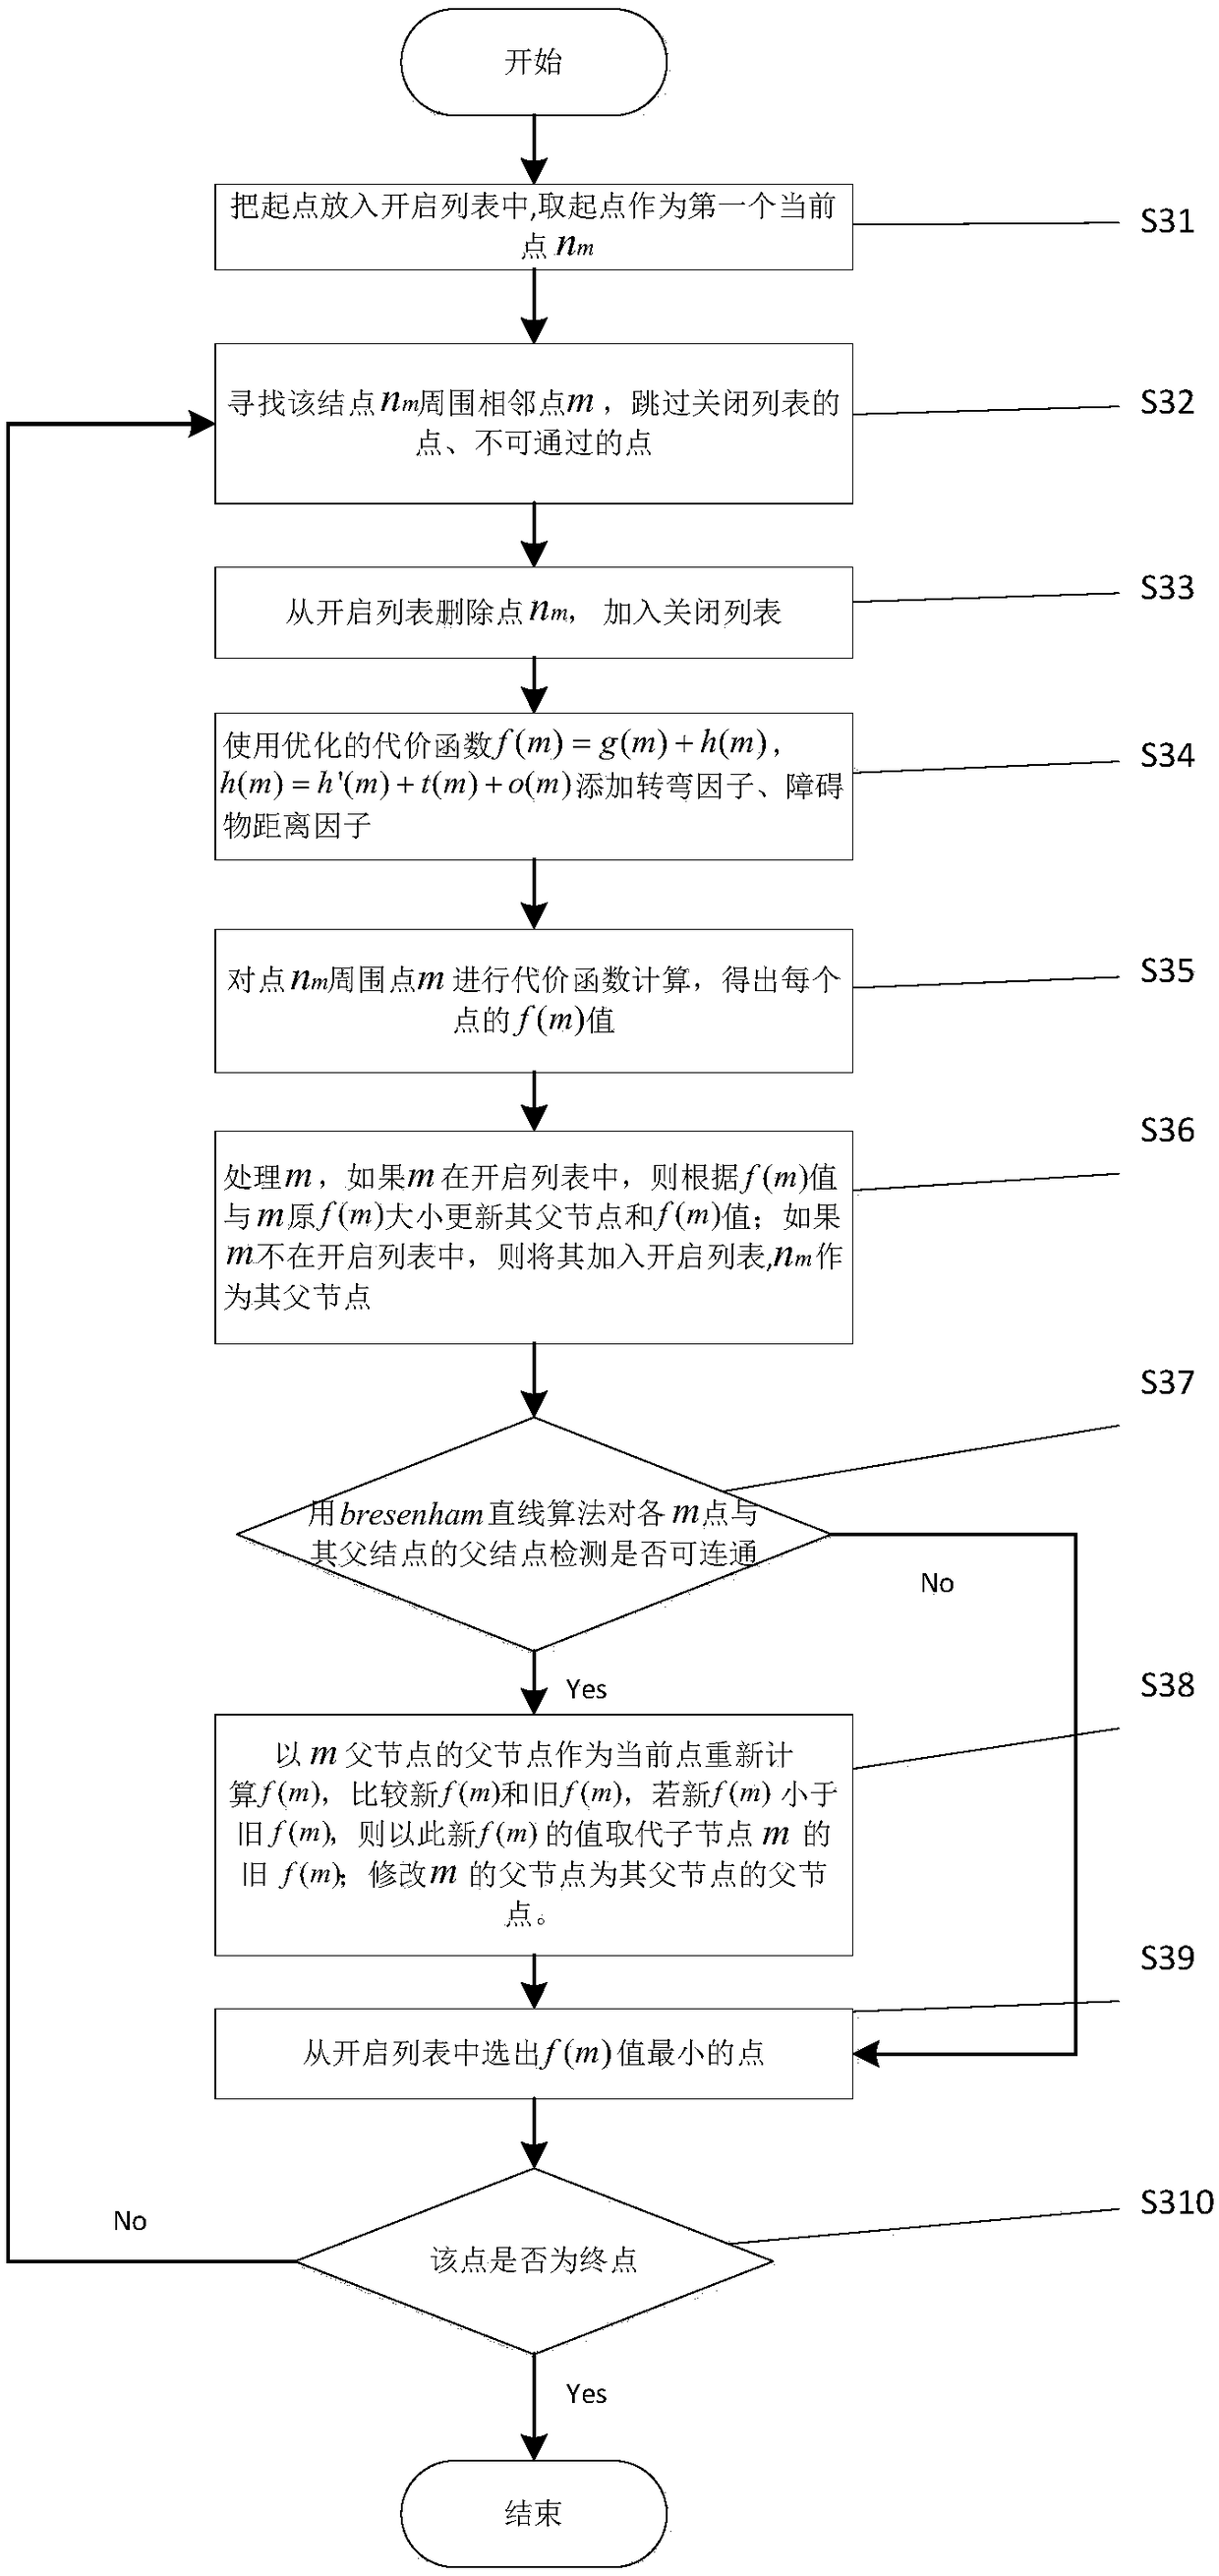 Automatic guiding vehicle global route planning method applicable to logistics warehousing system